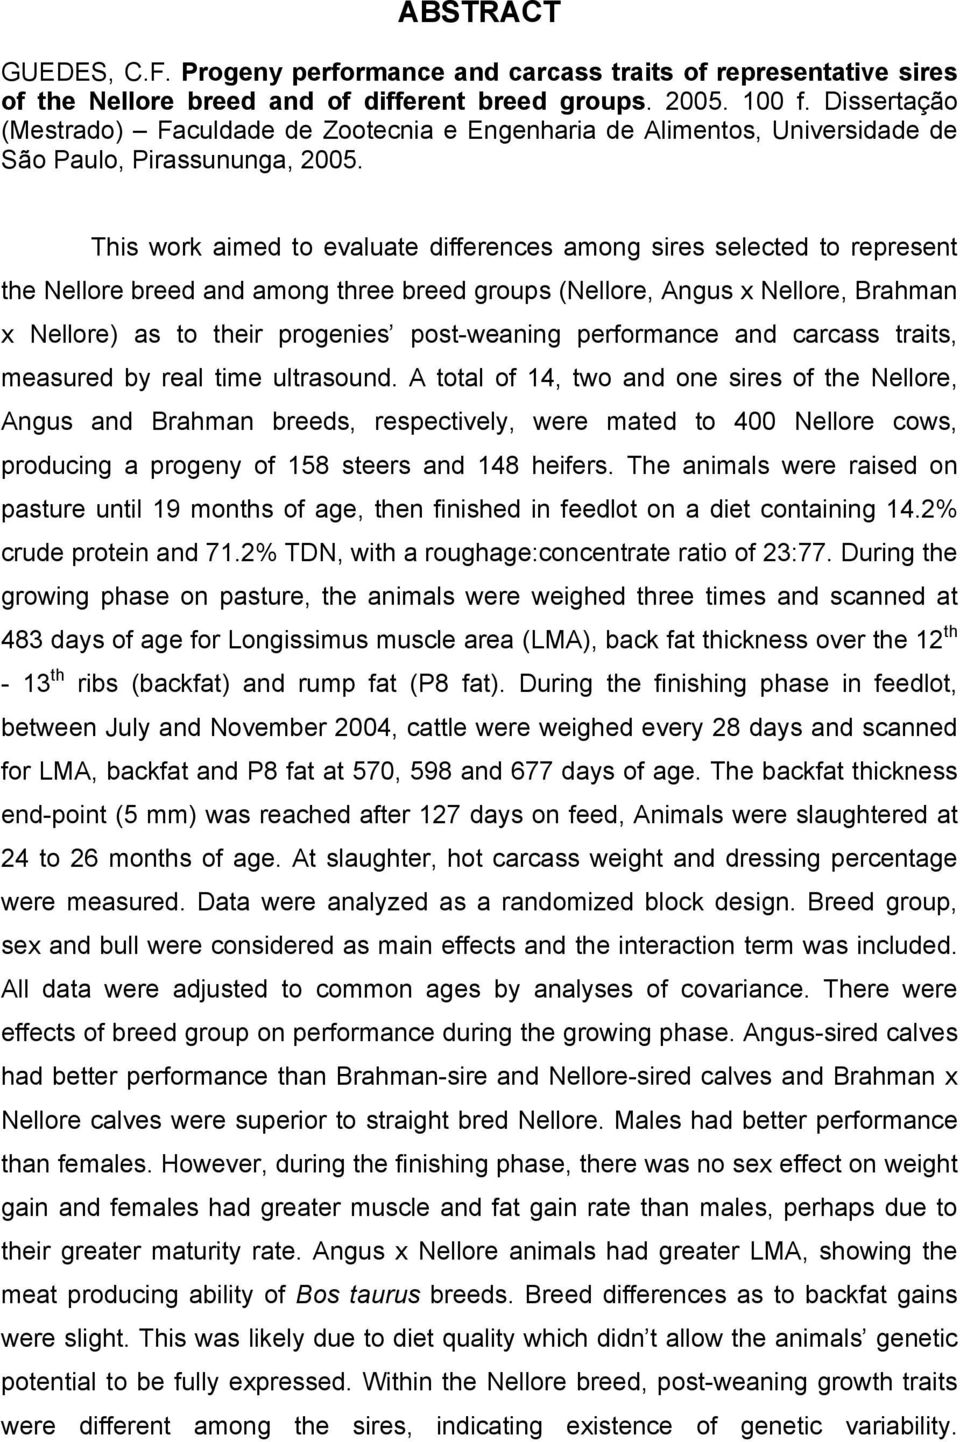 This work aimed to evaluate differences among sires selected to represent the Nellore breed and among three breed groups (Nellore, Angus x Nellore, Brahman x Nellore) as to their progenies